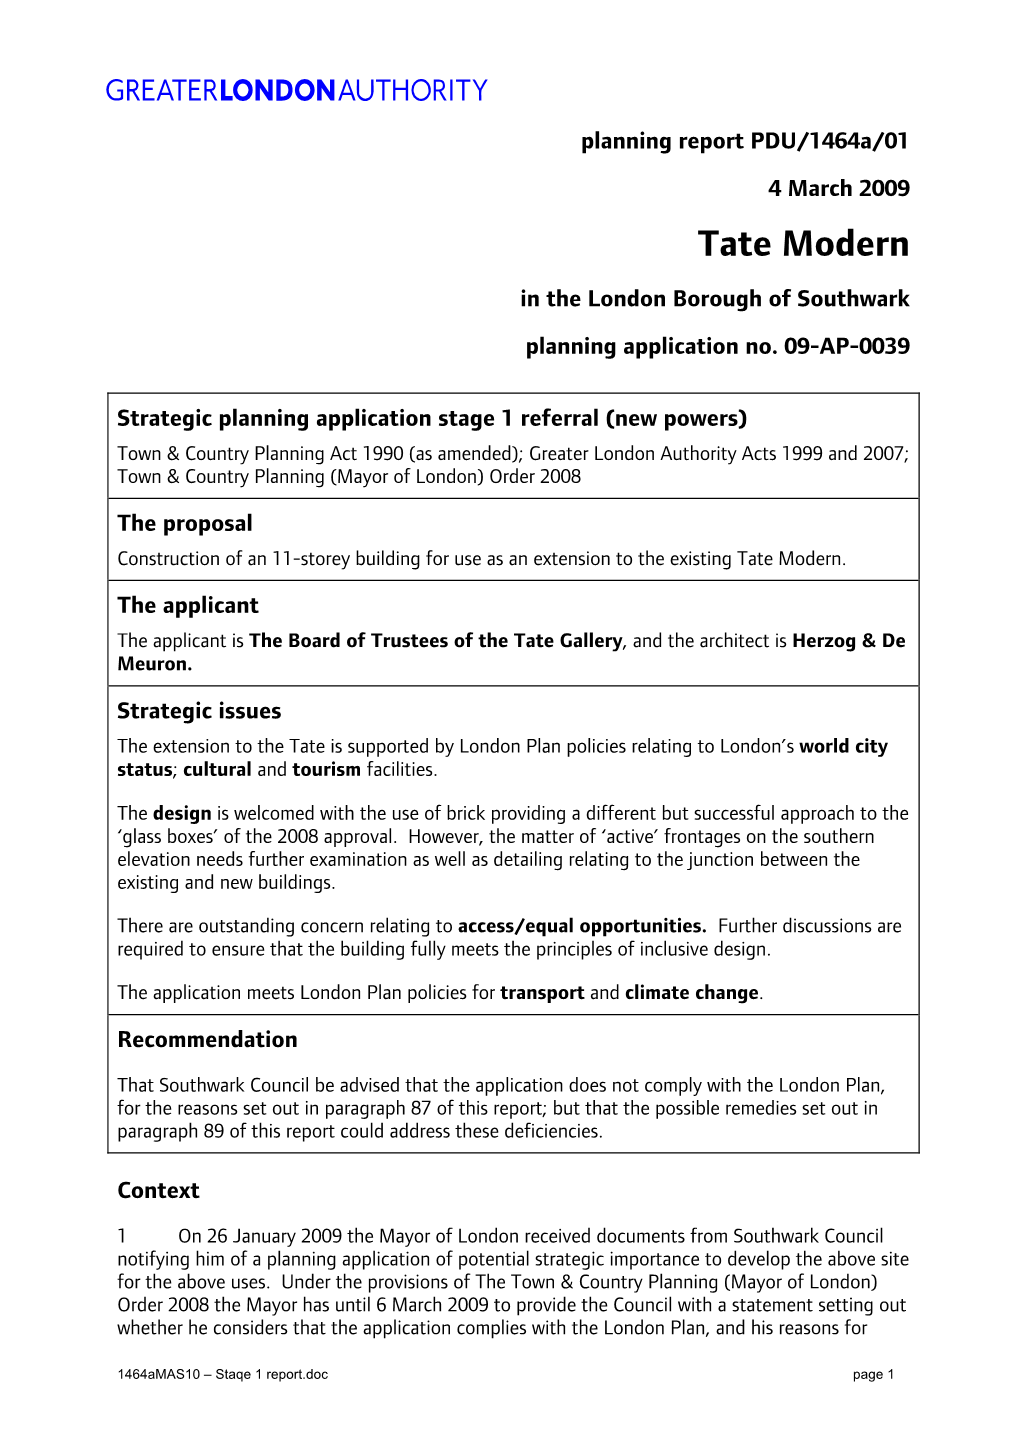 Tate Modern in the London Borough of Southwark Planning Application No